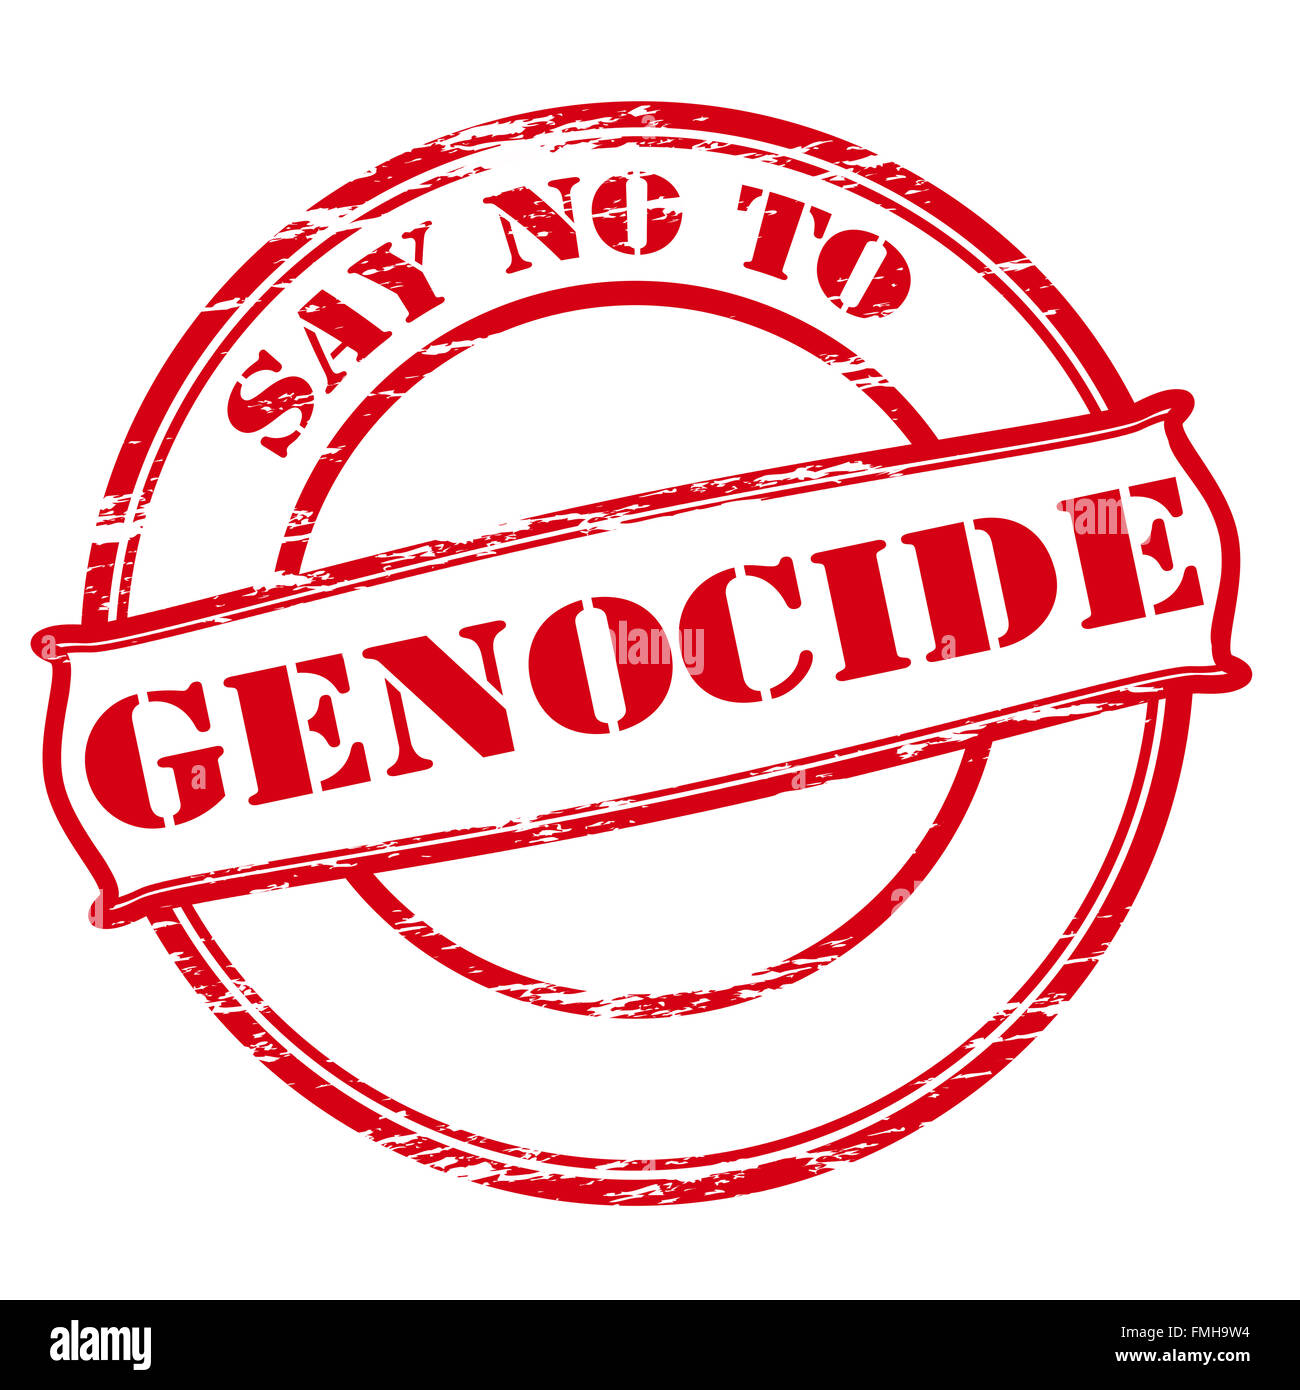 Rubber stamp with text say no to genocide inside, vector illustration Stock Photo